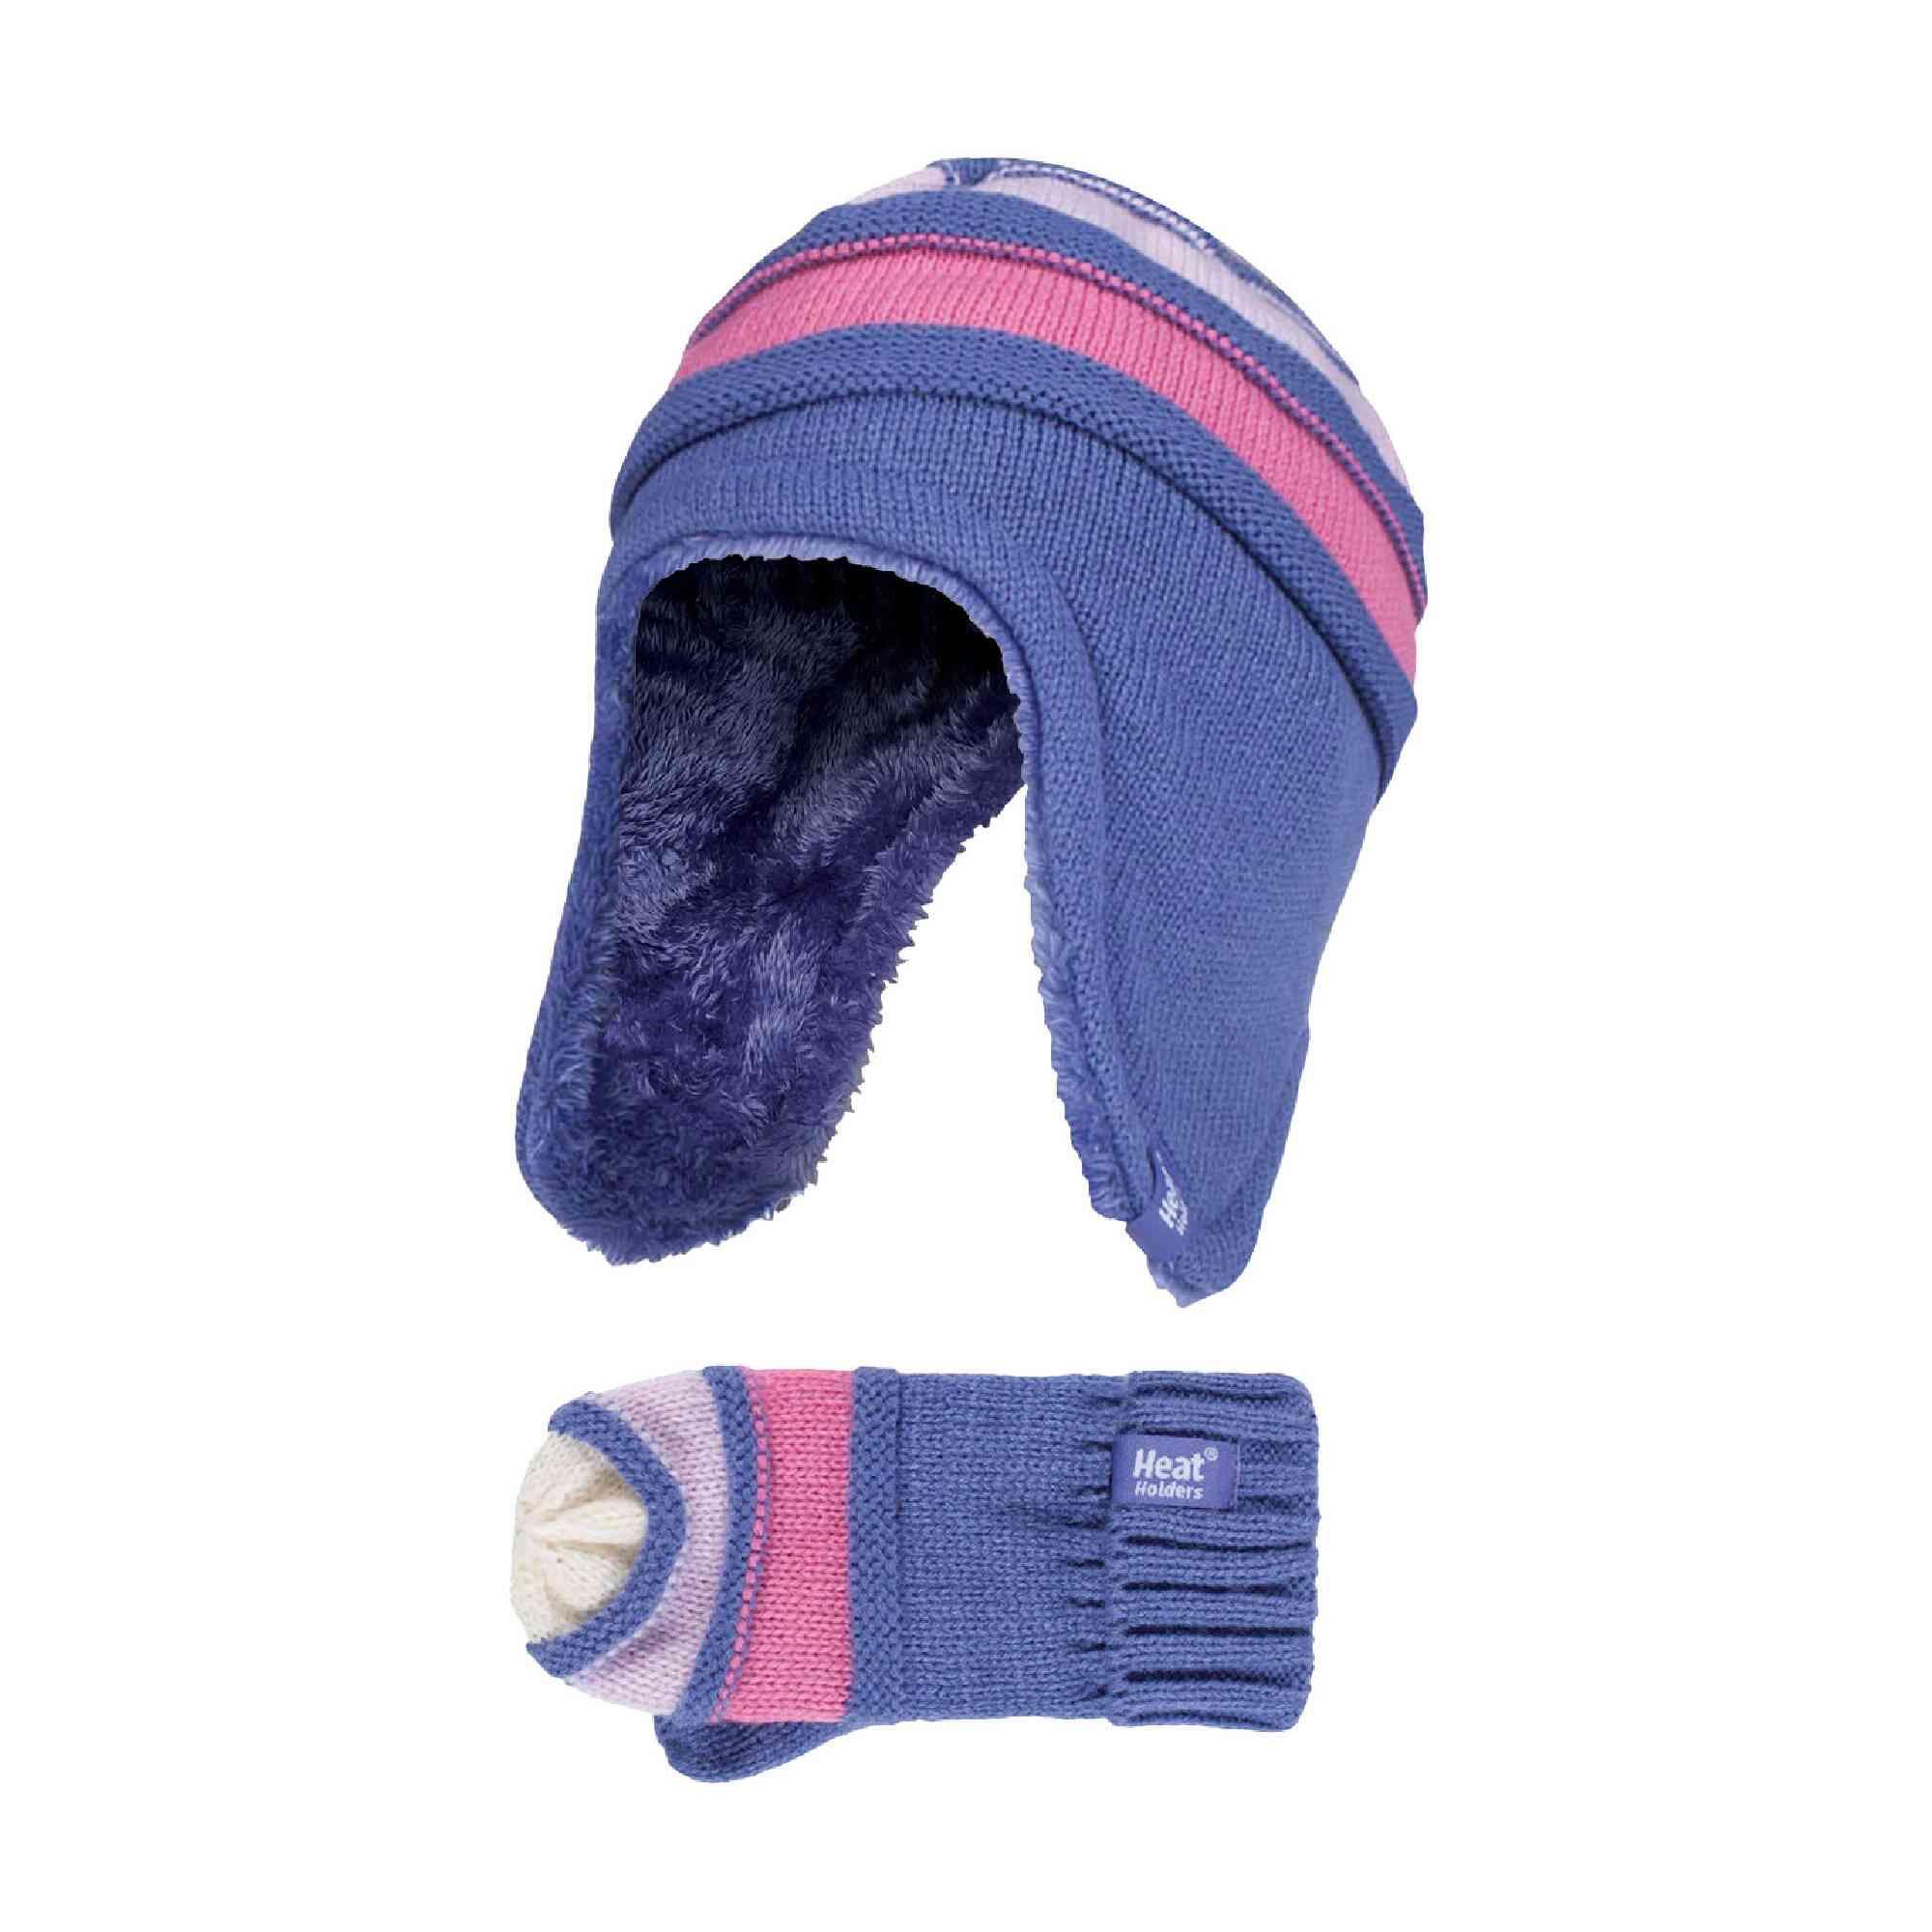 Kids Winter Warm Fleece Lined Thermal Beanie Hat and Mittens with Ear Flaps 1/3